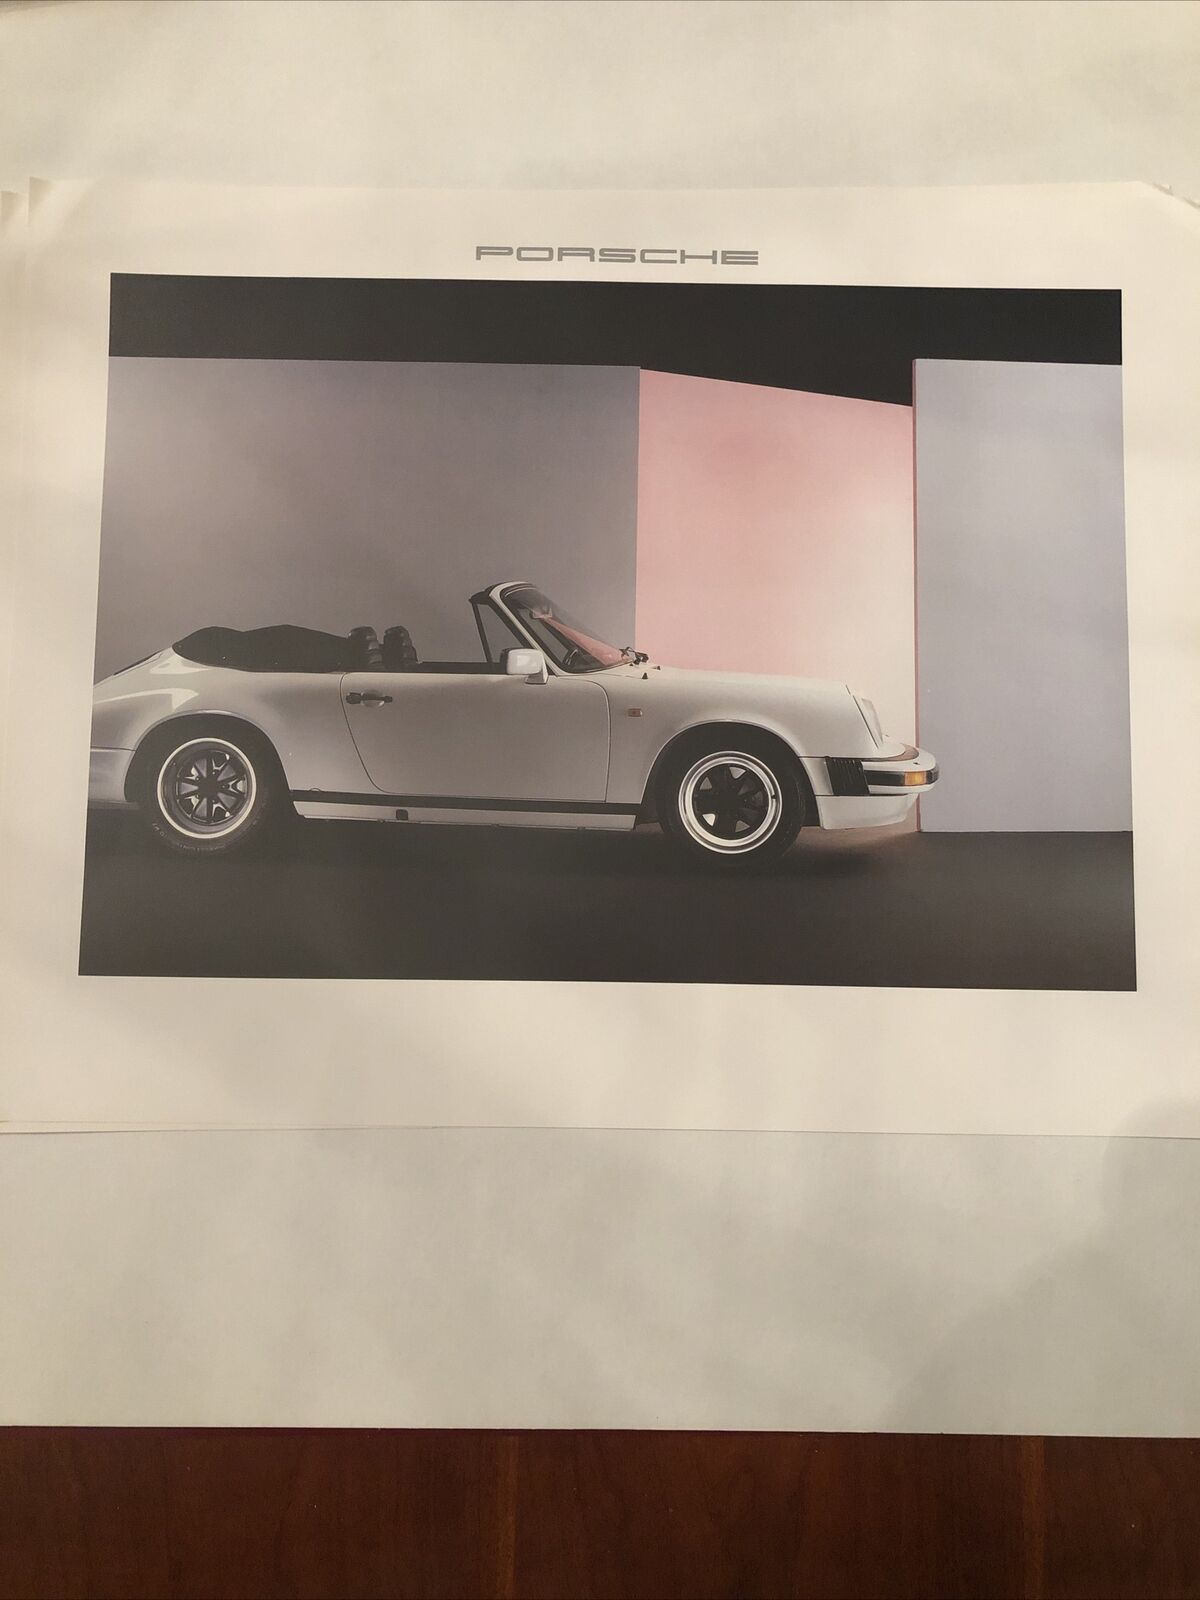 Awesome historic Porsche poster number 99